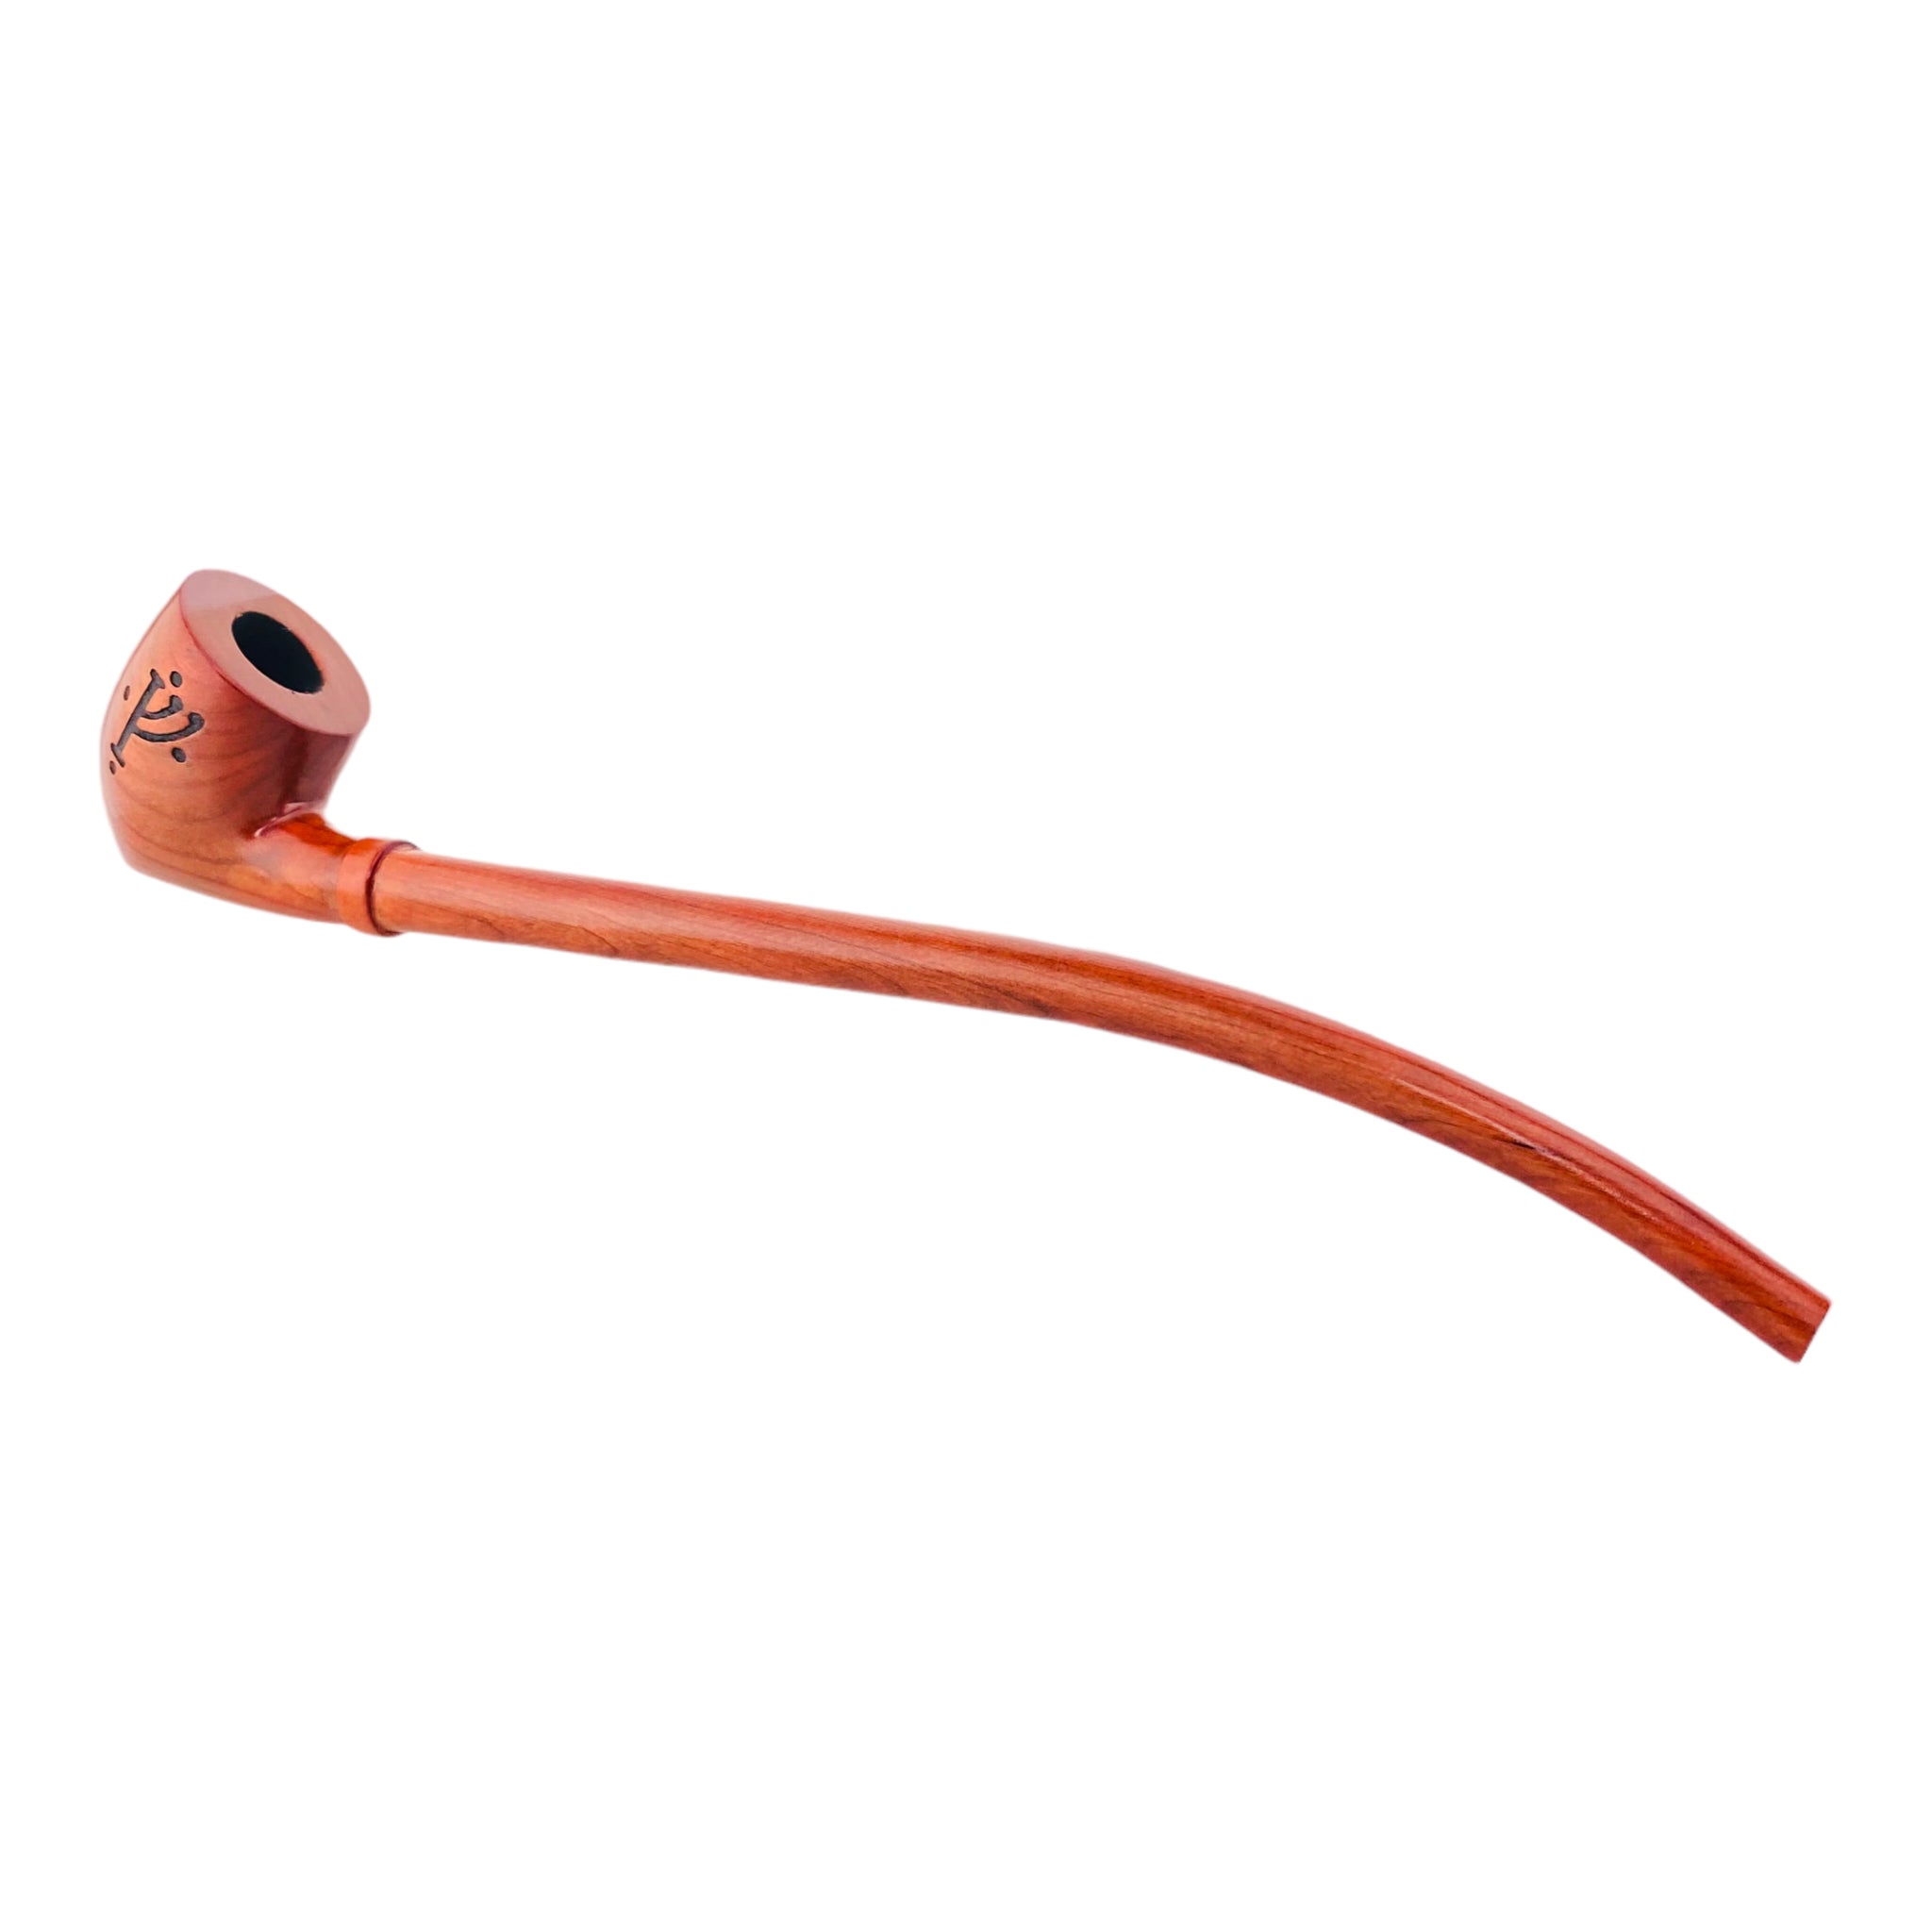 Shire Pipes - The Lord Of The Rings - Gandalf Smoking Pipe